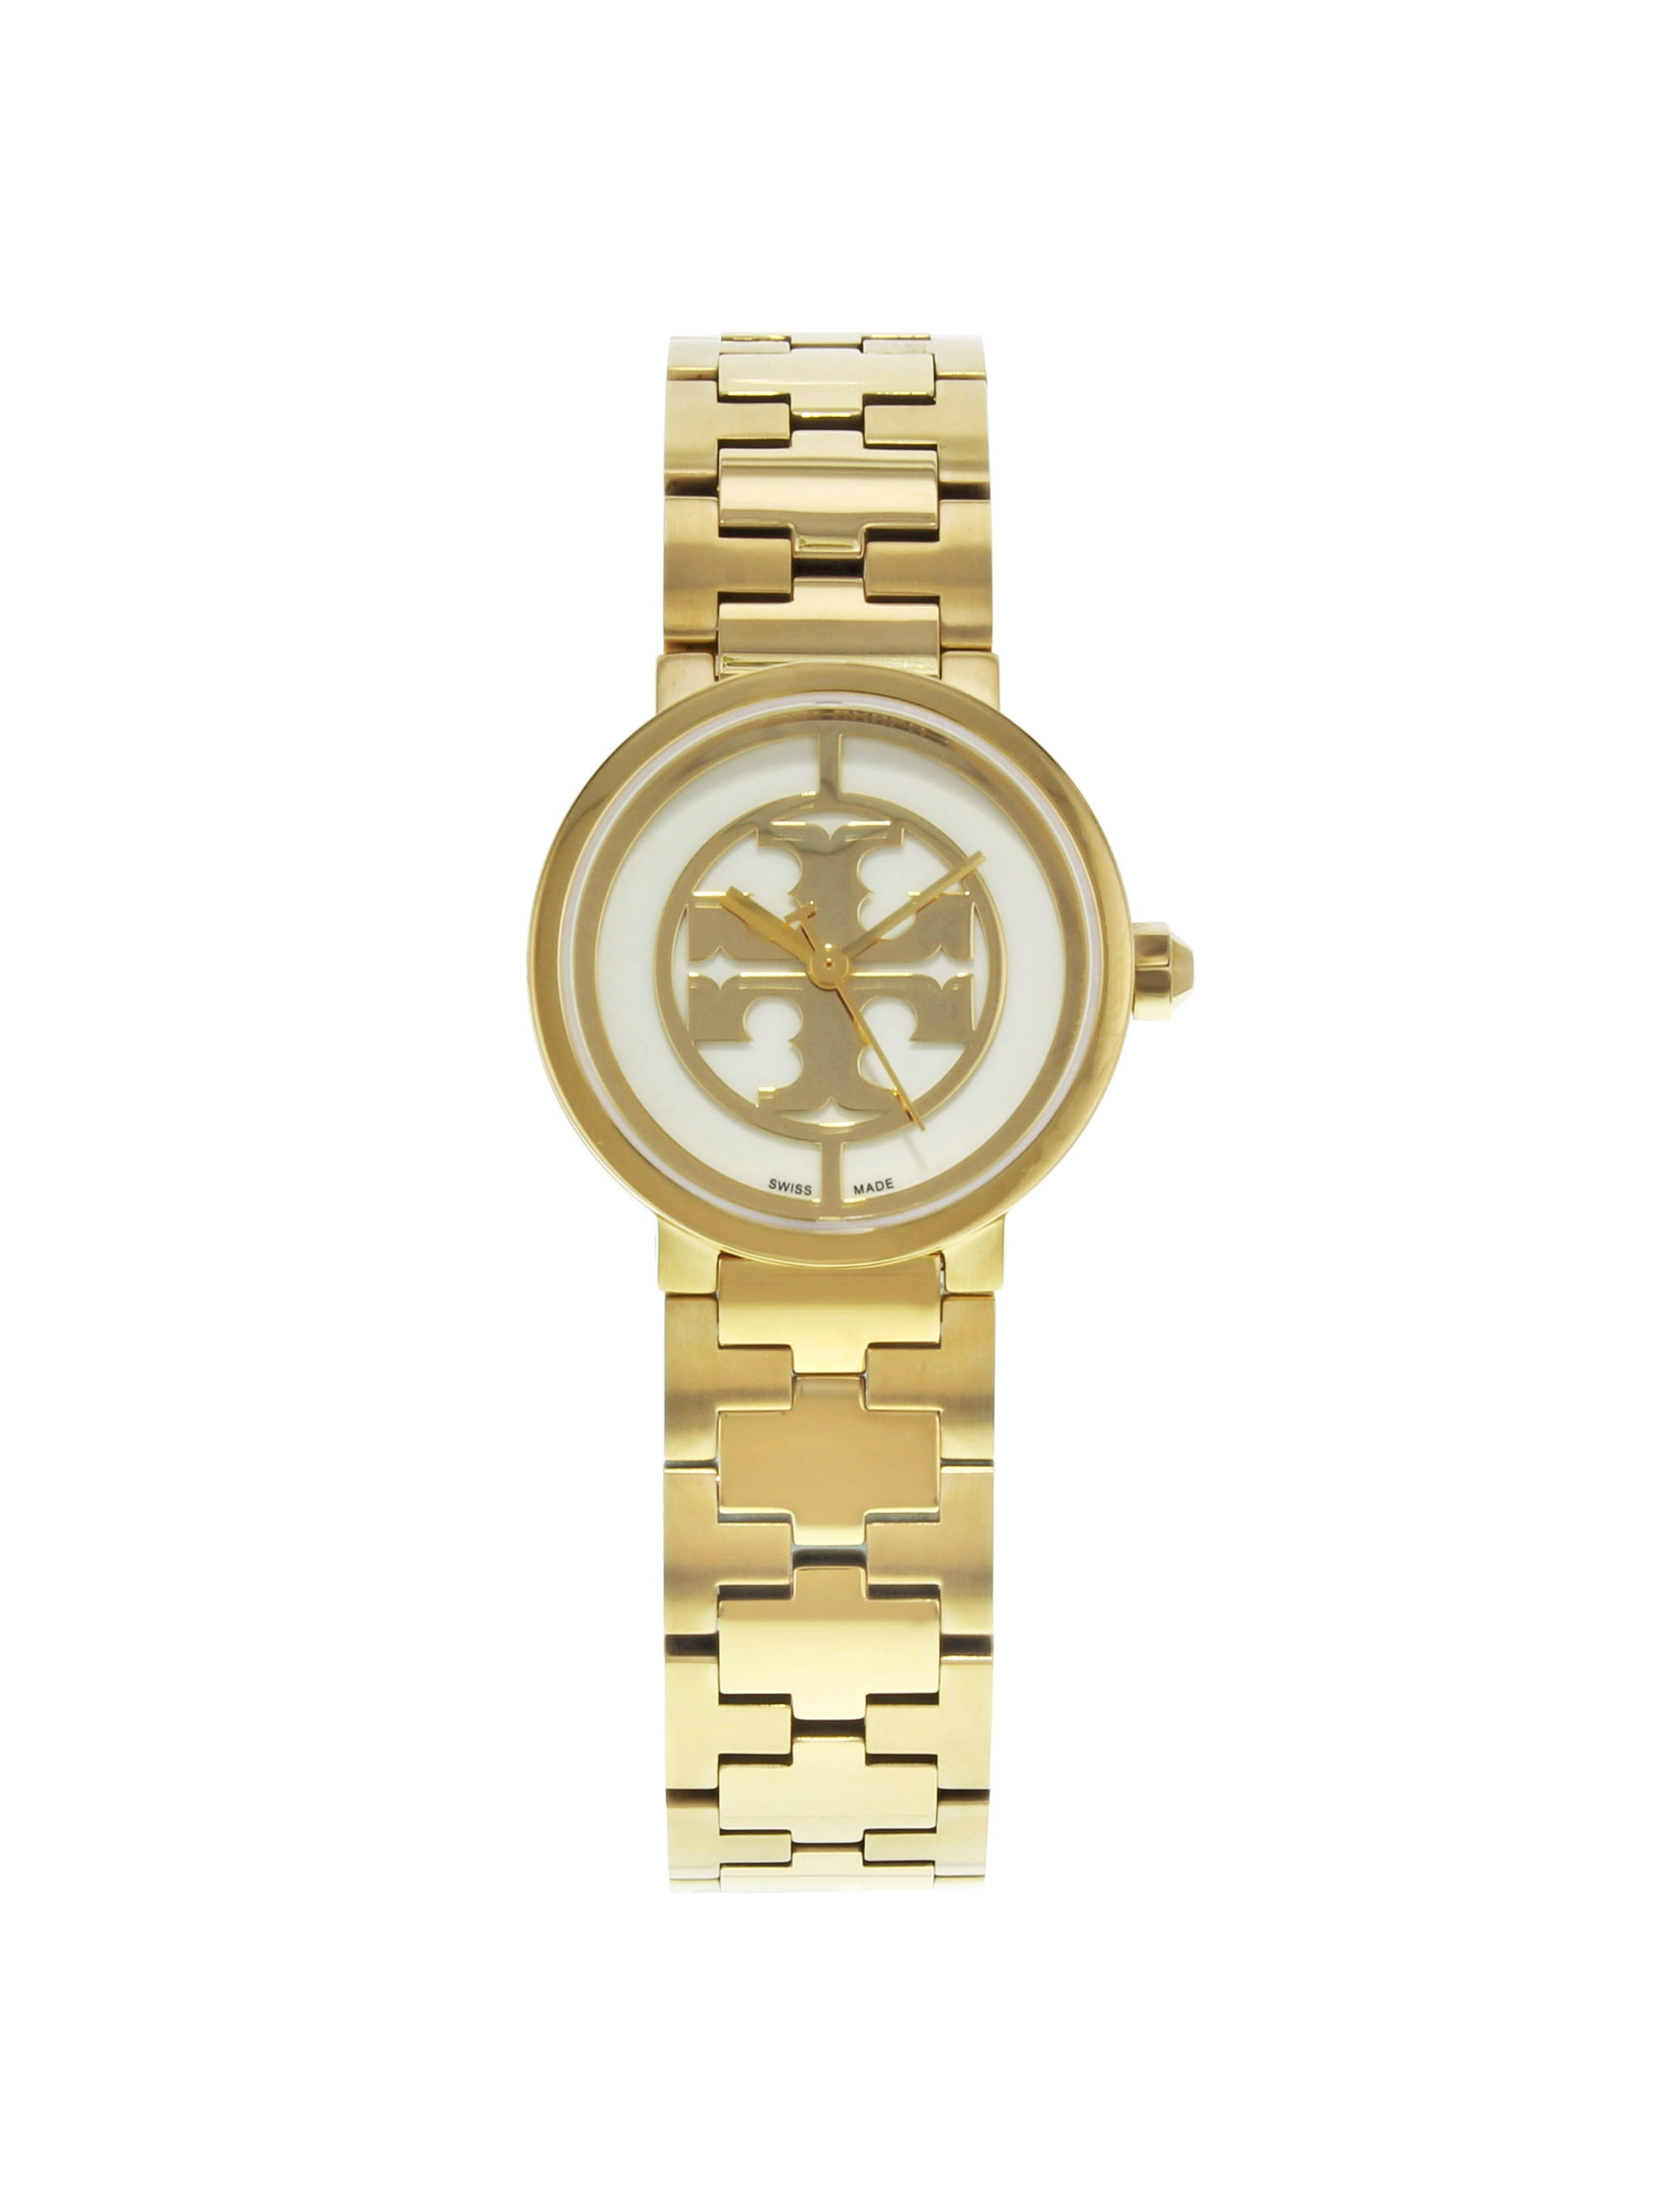 Tory Burch Reva 21mm Gold Tone Stainless Steel Quartz Ladies Watch TRB4030  Pre-Owned 